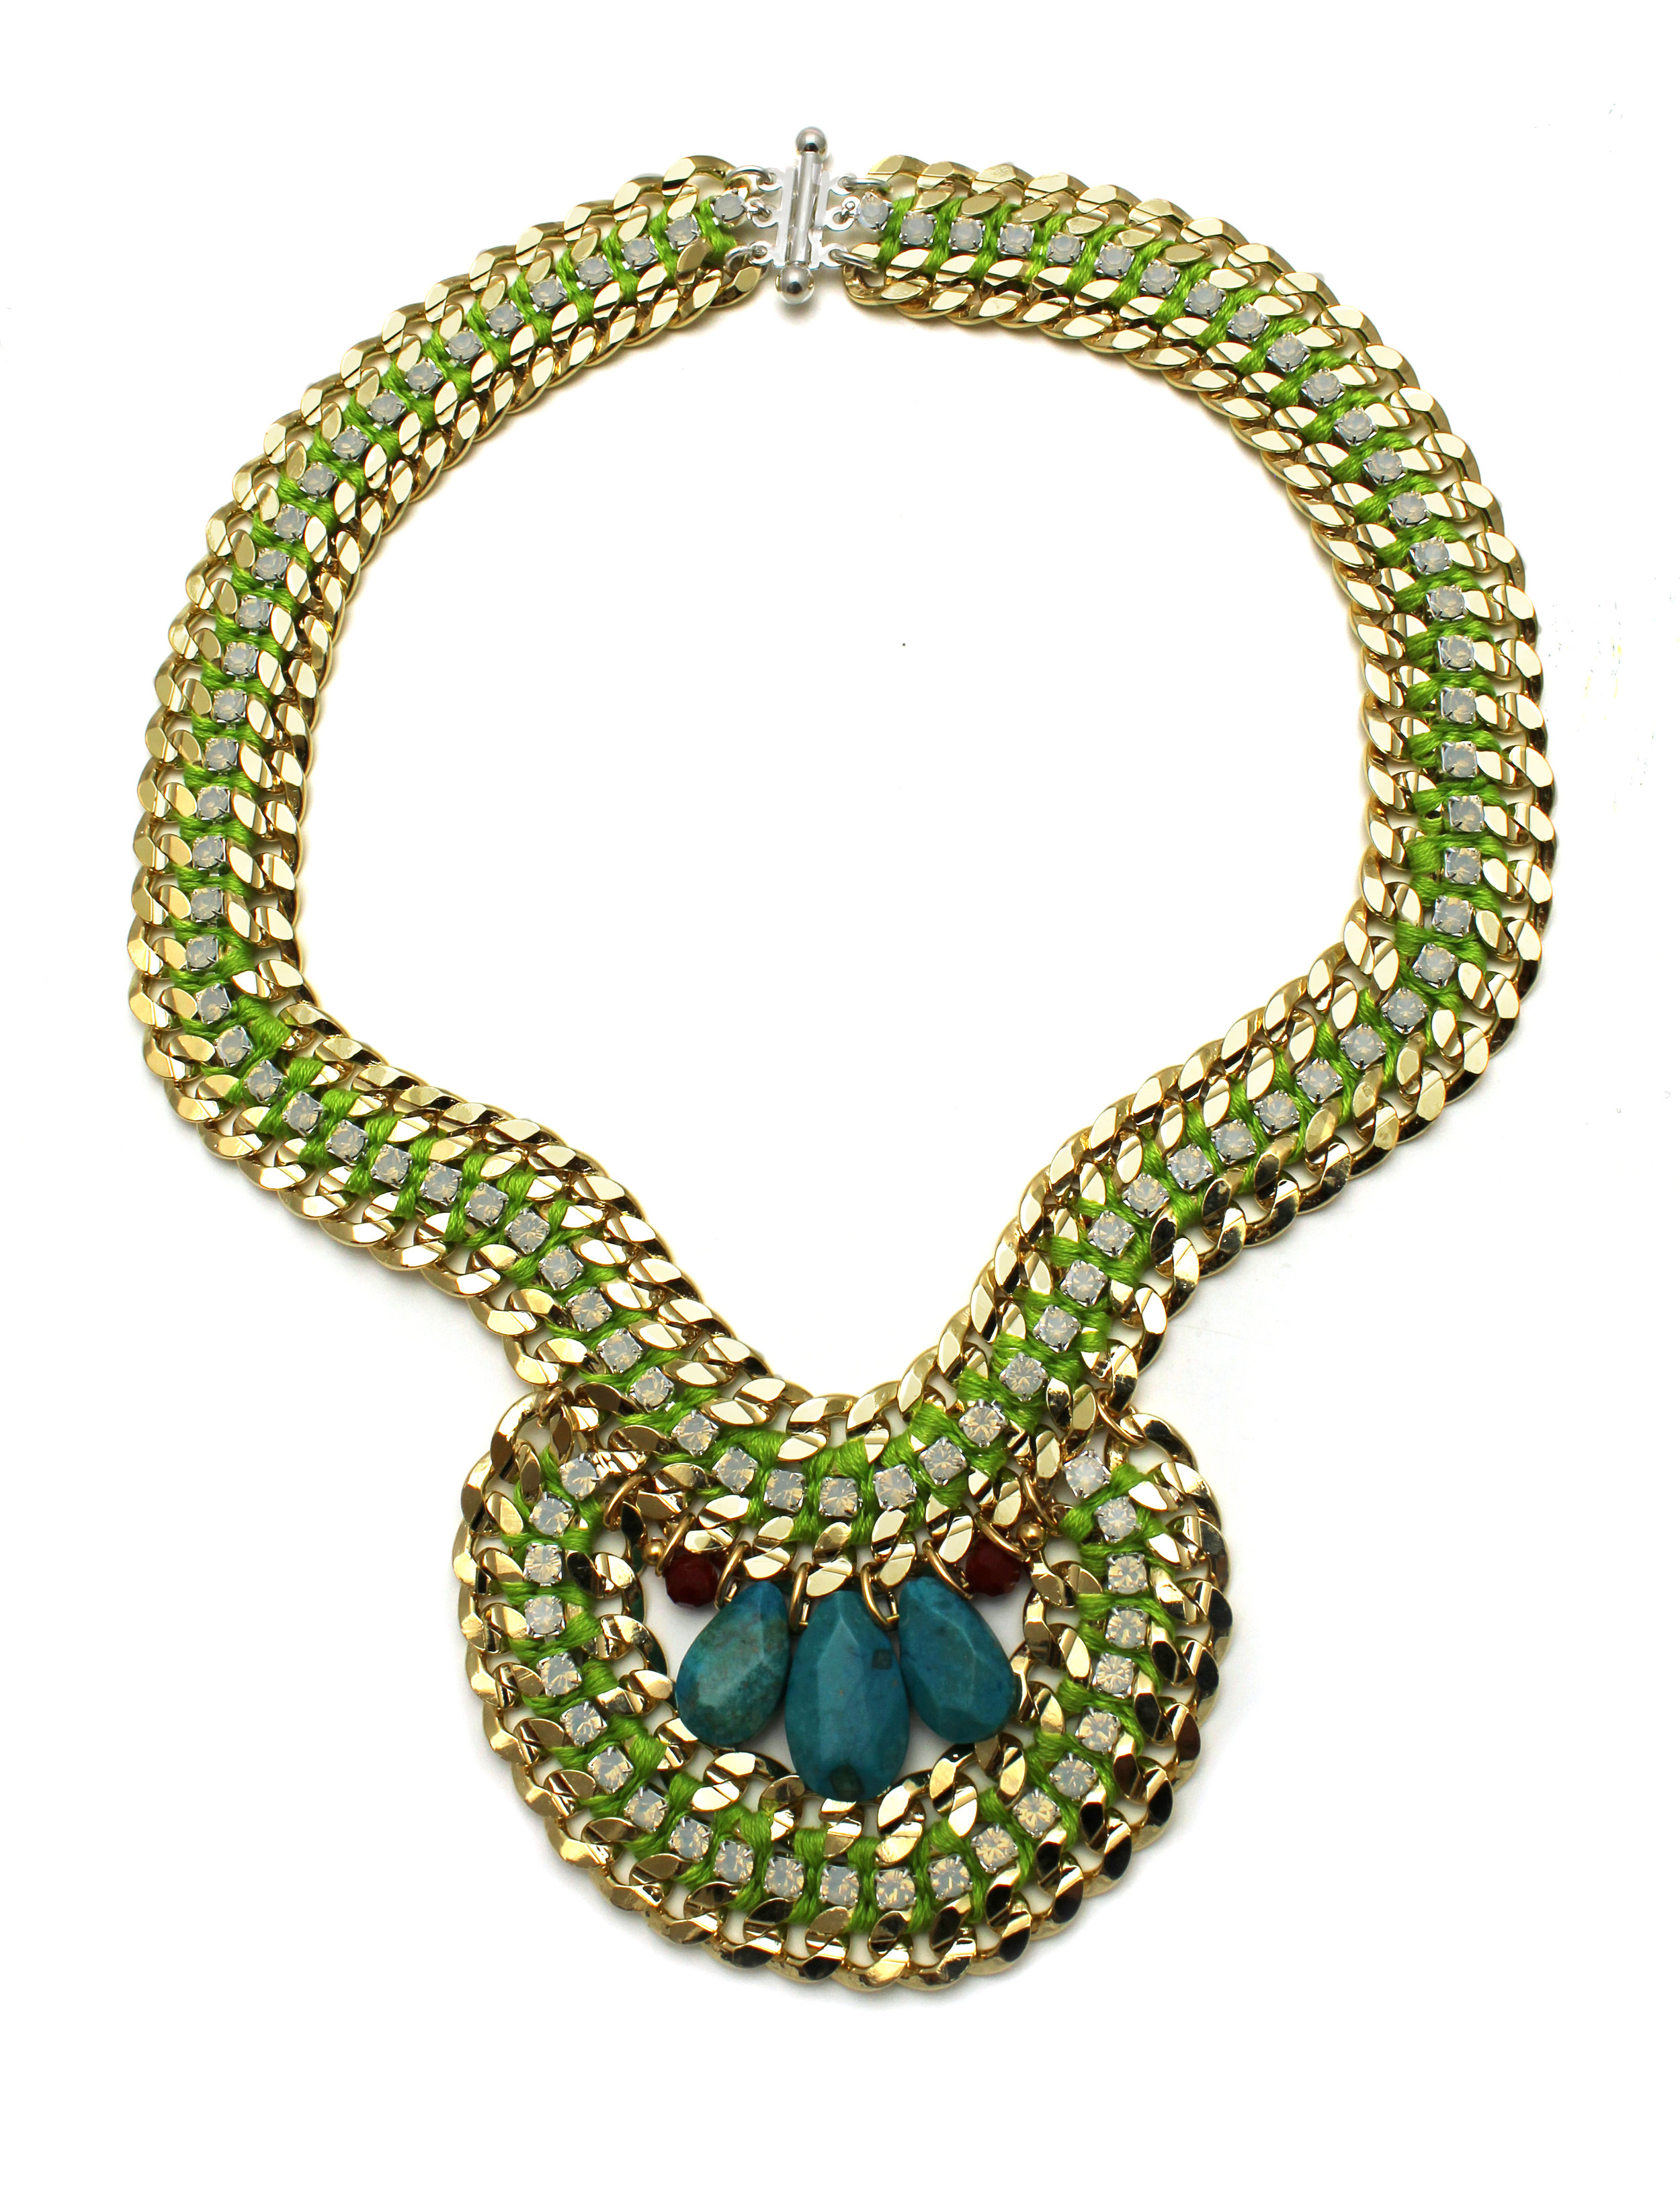 077 Turquoise & White Opal Lime Necklace.jpg